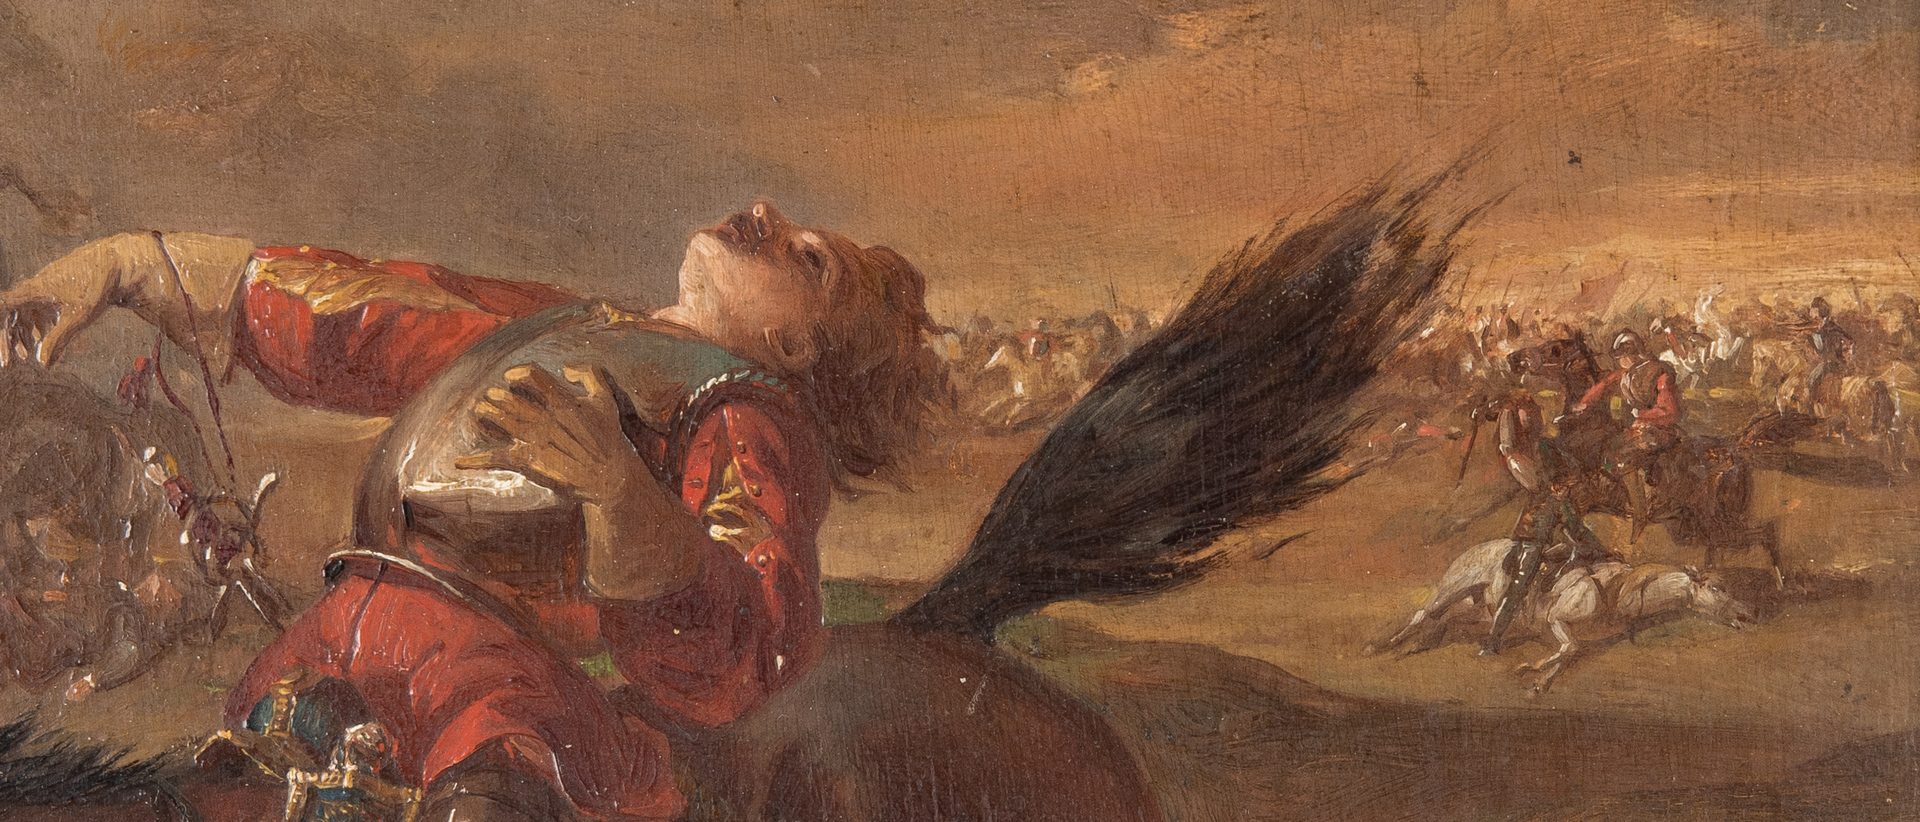 Lot 357: English School Painting, "Wounded in Battle"